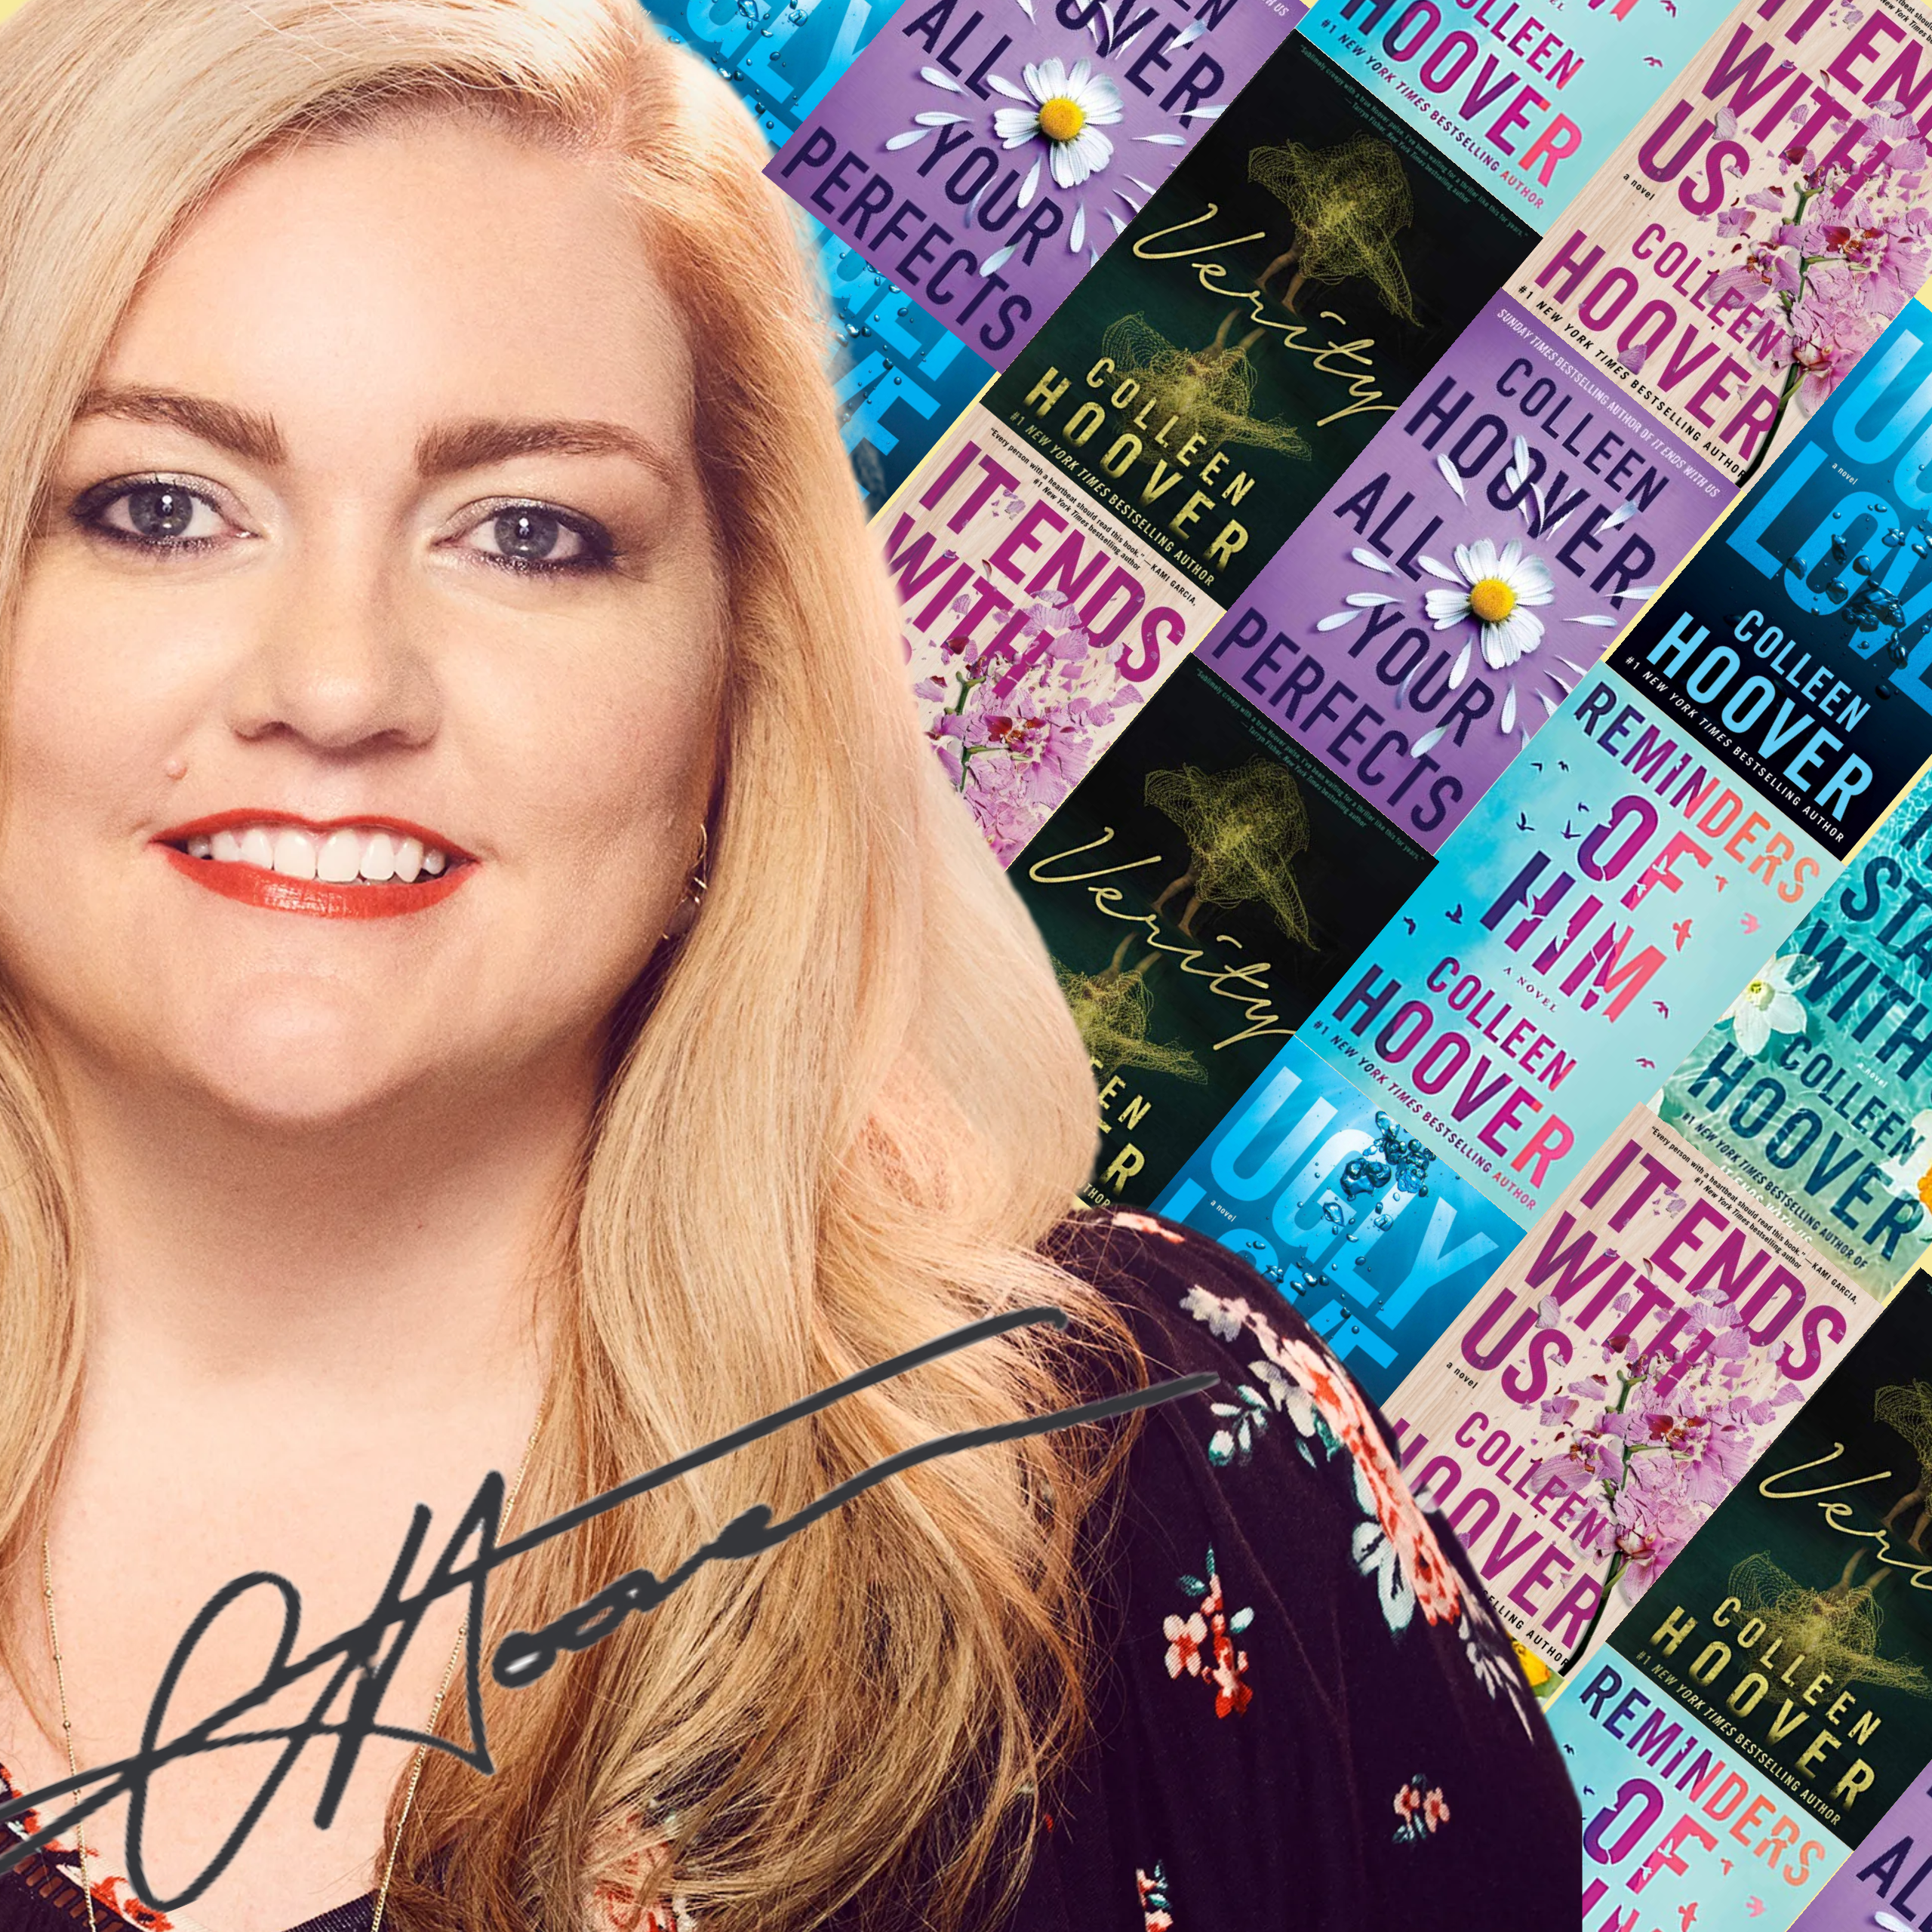 How Colleen Hoover Became one of the Most Influential Authors of